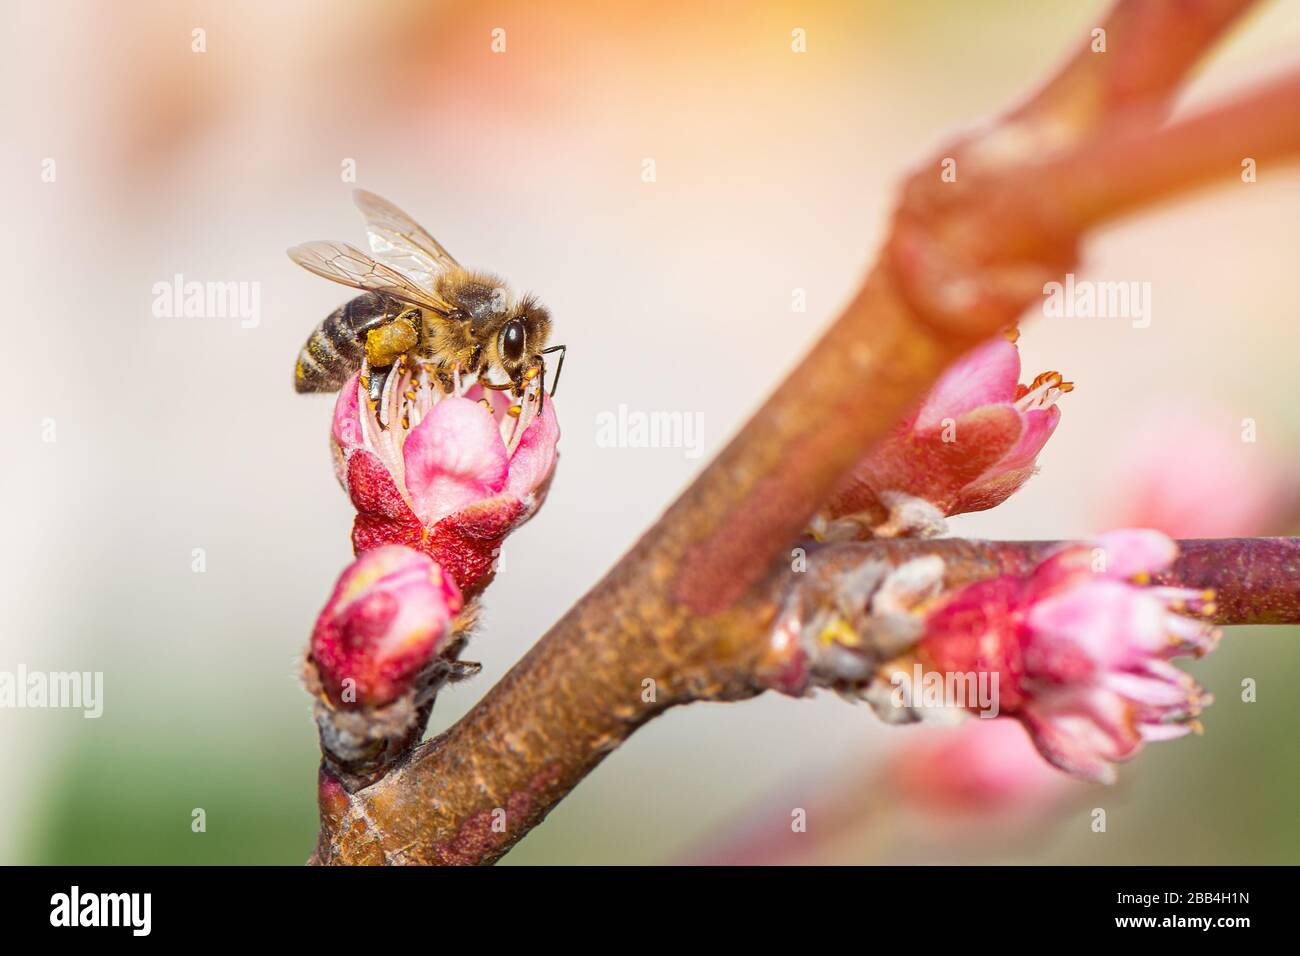 Honey bee collecting pollen from a blooming peach tree Stock Photo